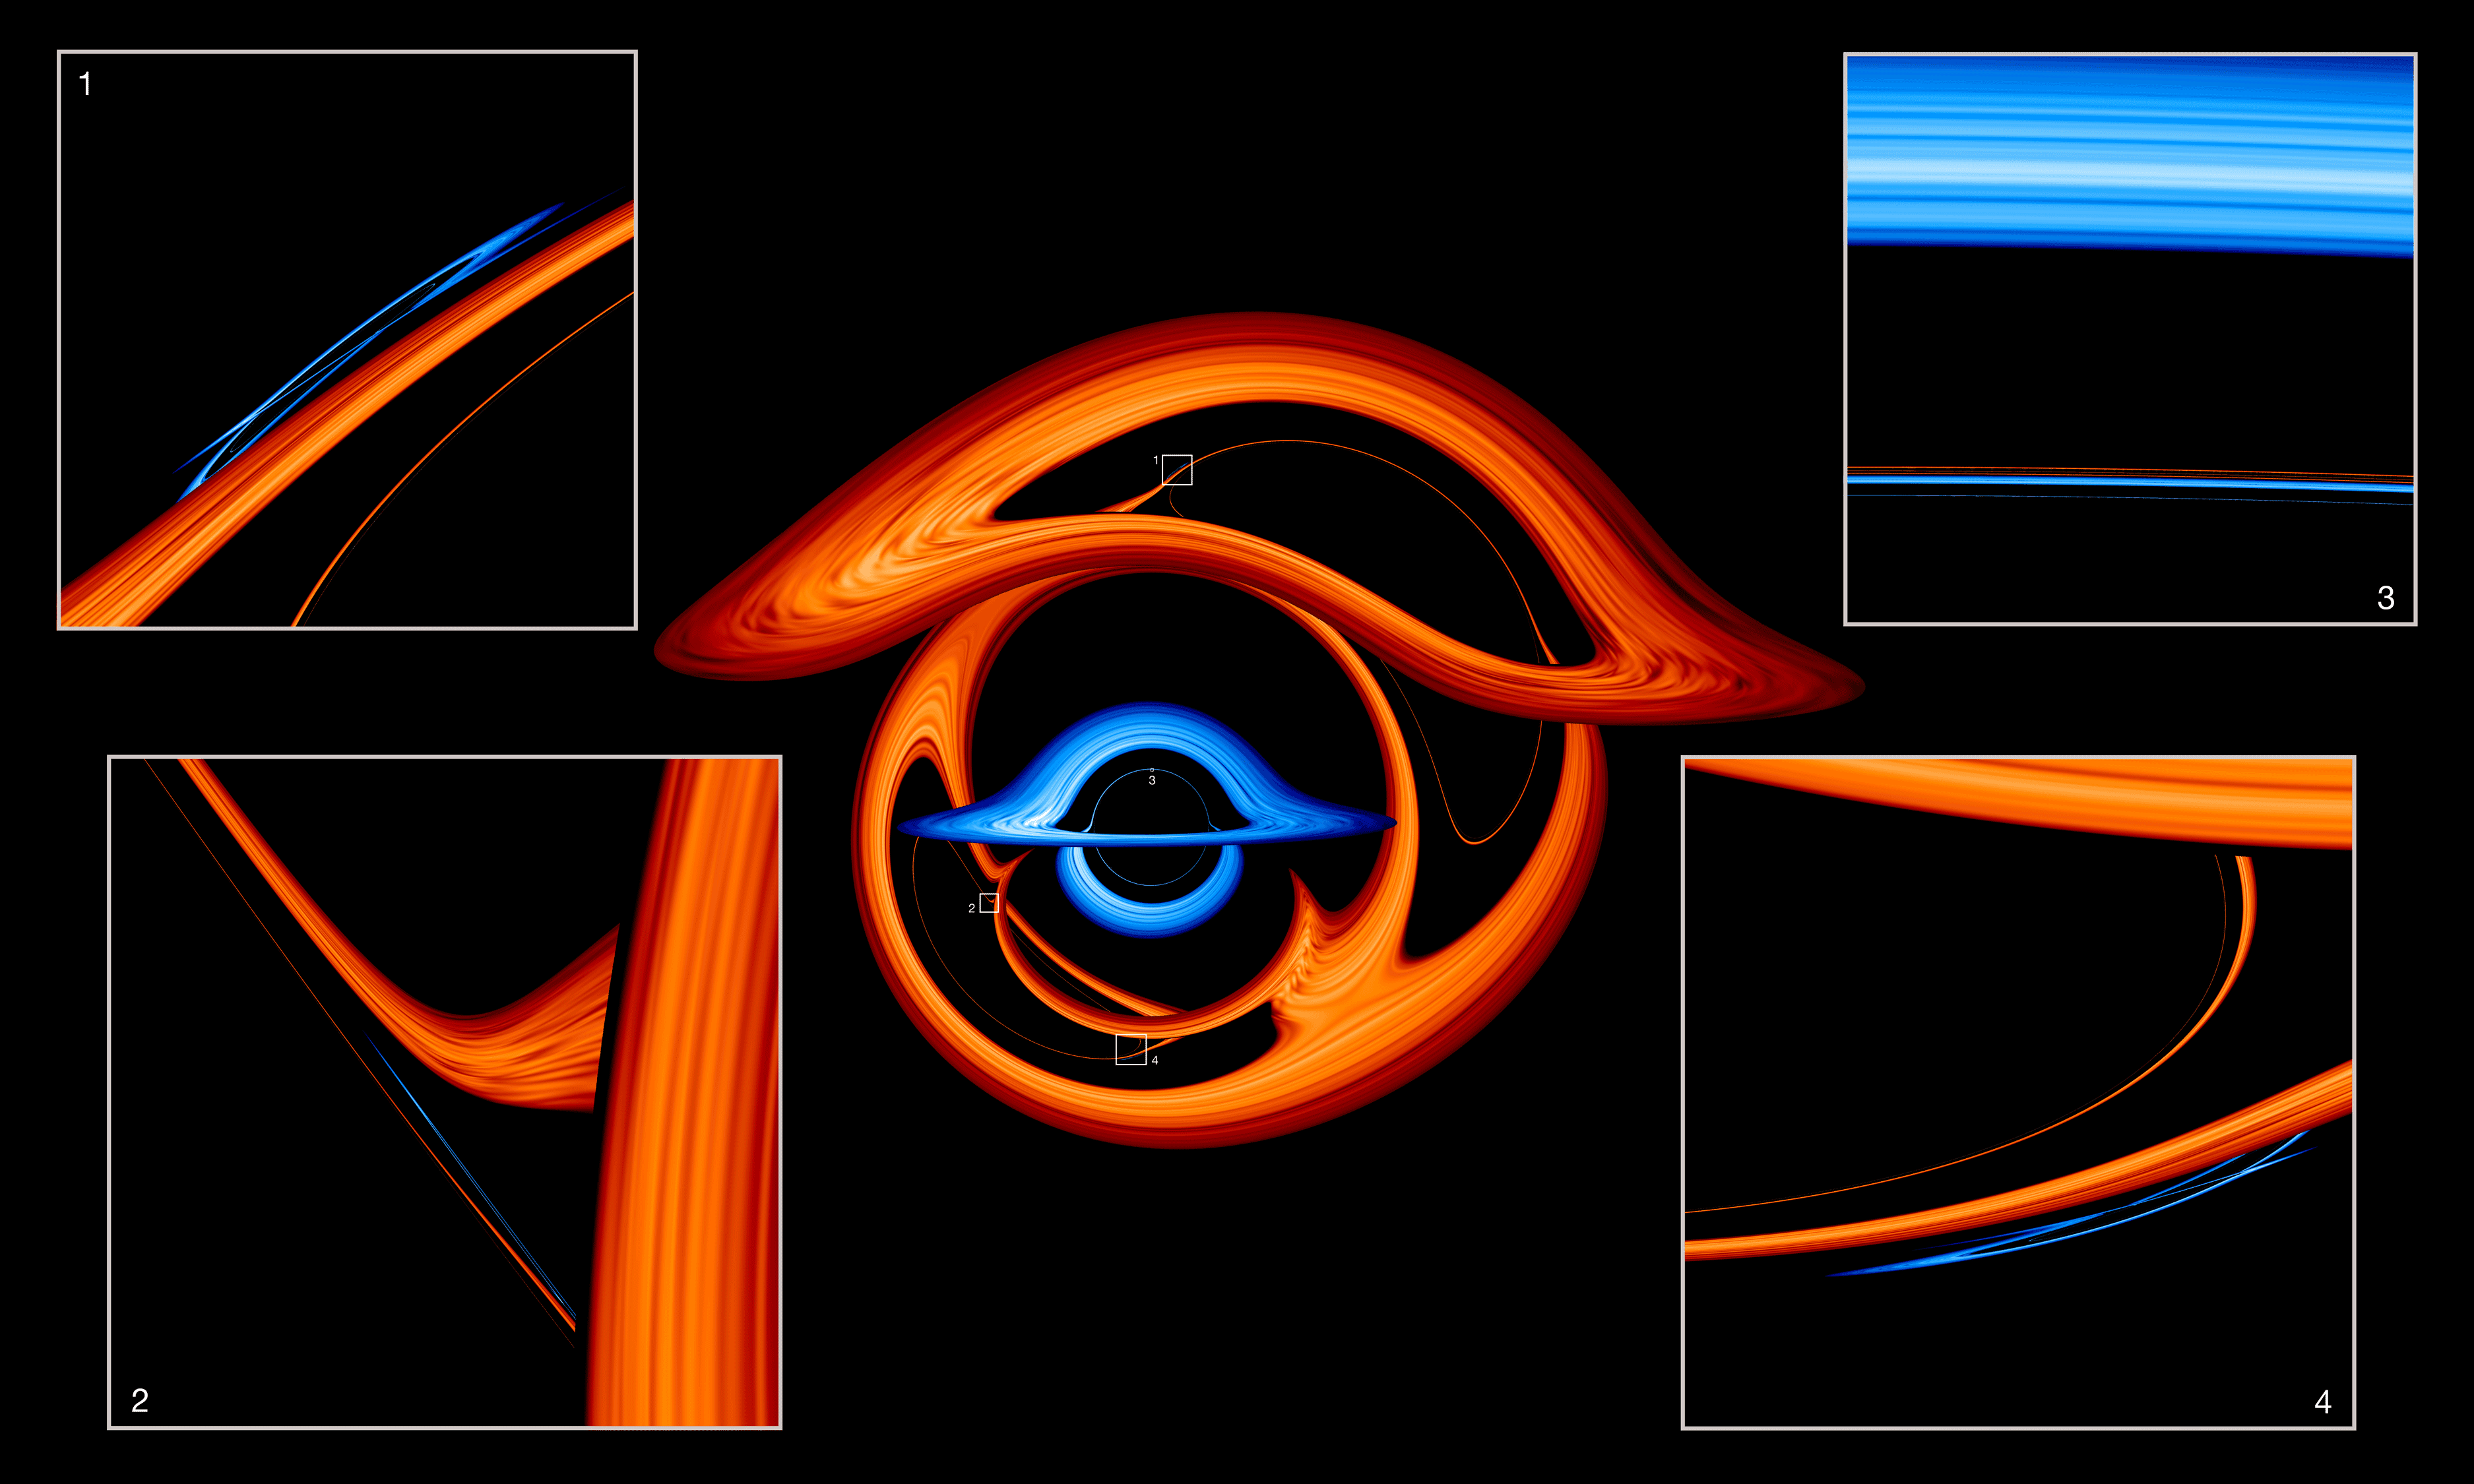 This image shows the warped view of a larger supermassive black hole (red disk) when it passes seen almost directly behind a companion black hole (blue disk) with half its mass. The gravity of the foreground black hole transforms its partner into a surreal collection of arcs. Insets highlight areas where one black hole produces a complete but distorted image of the other. Light from the accretion disks produces these self-similar images as it travels through the tangled fabric of space and time near both black holes.